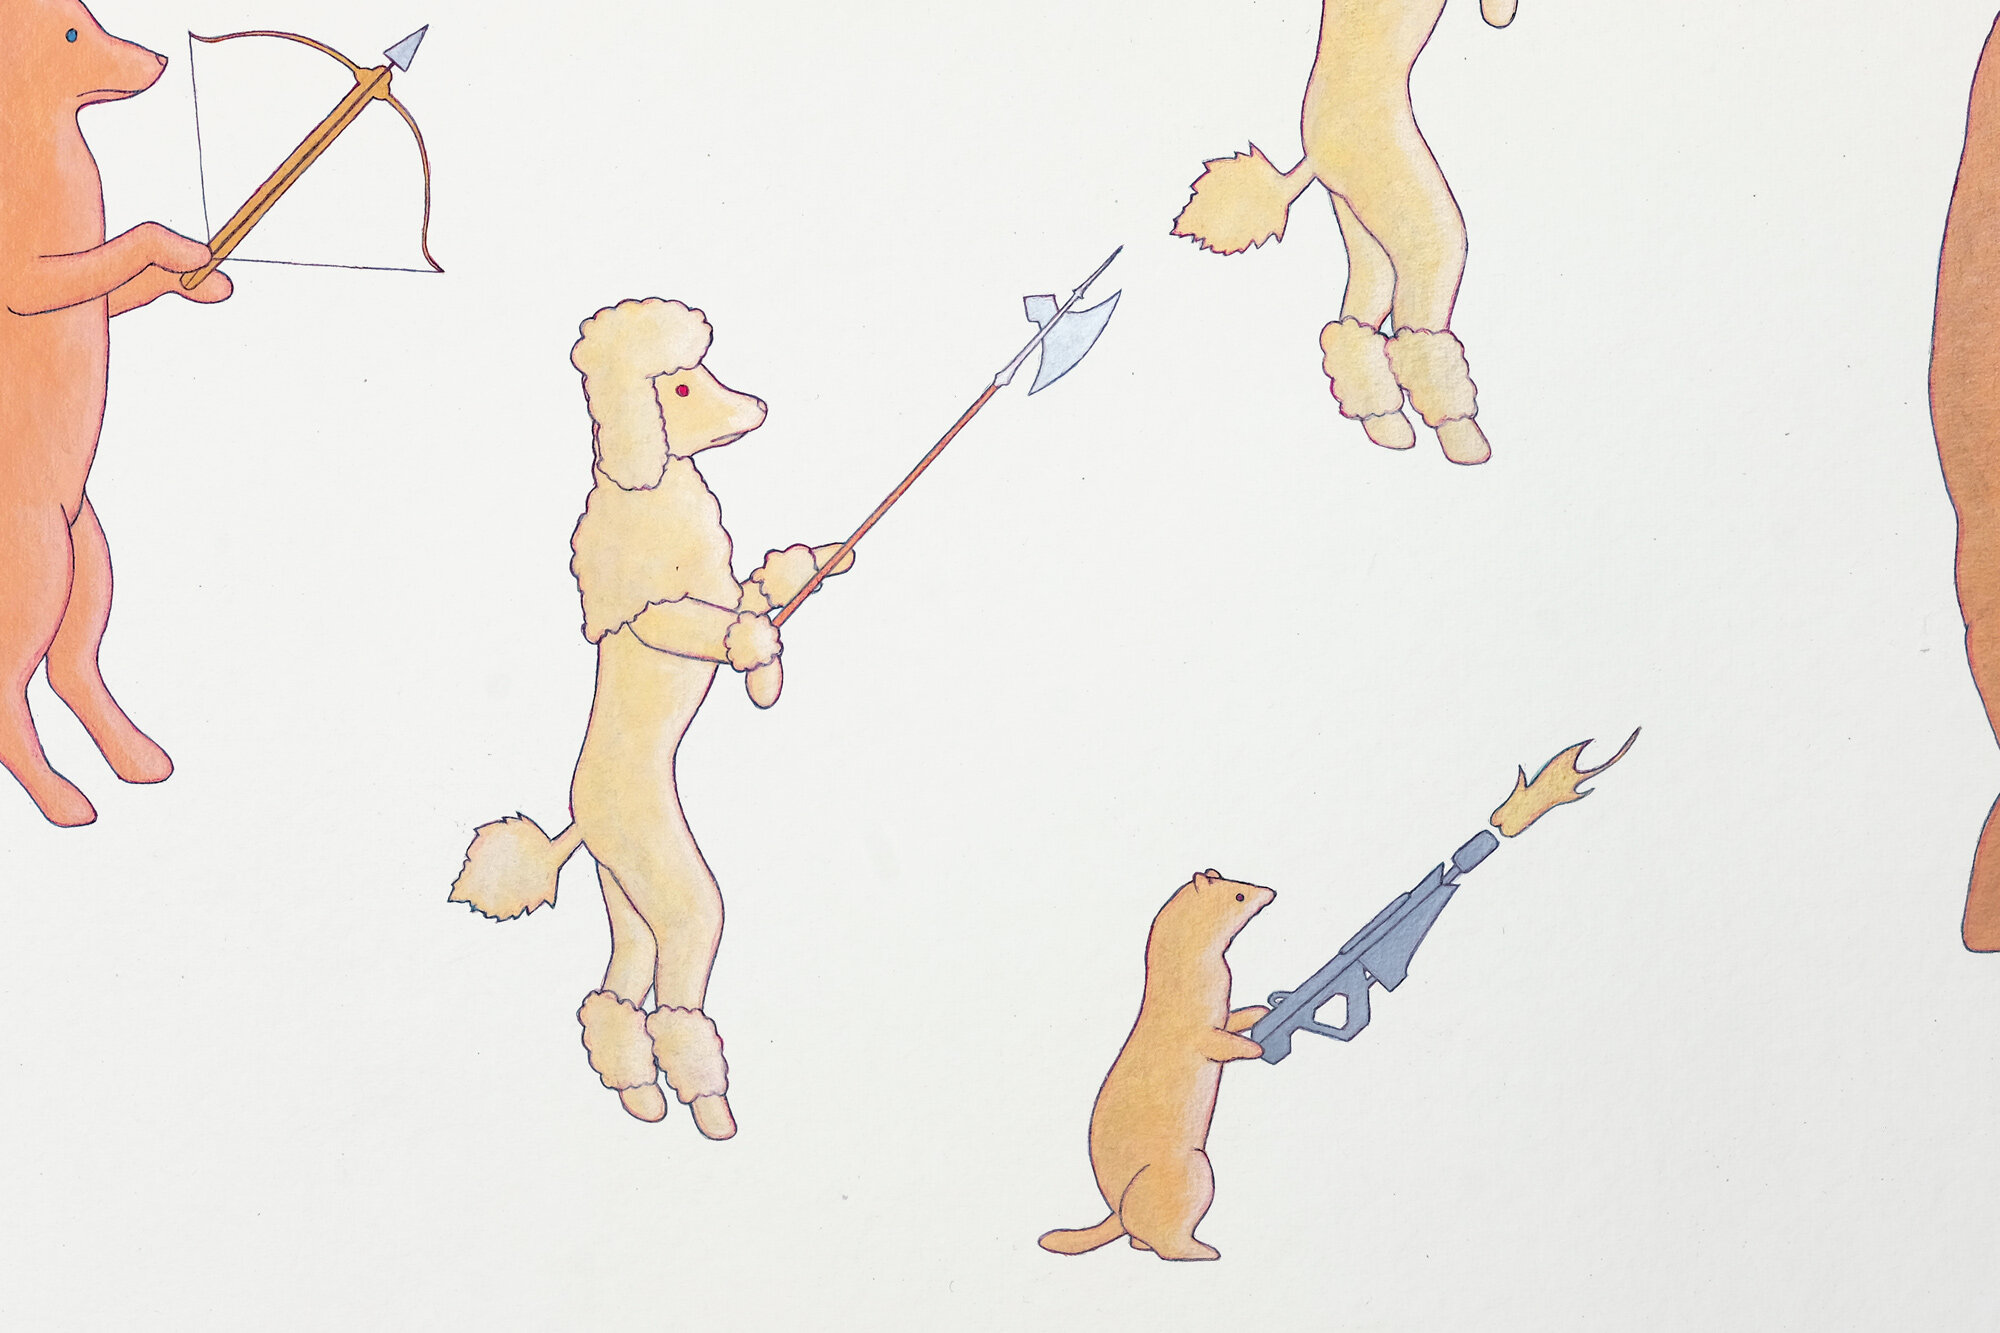   More Animals and Their Weapons,  2021 Acrylic on paper, 22” x 30” 